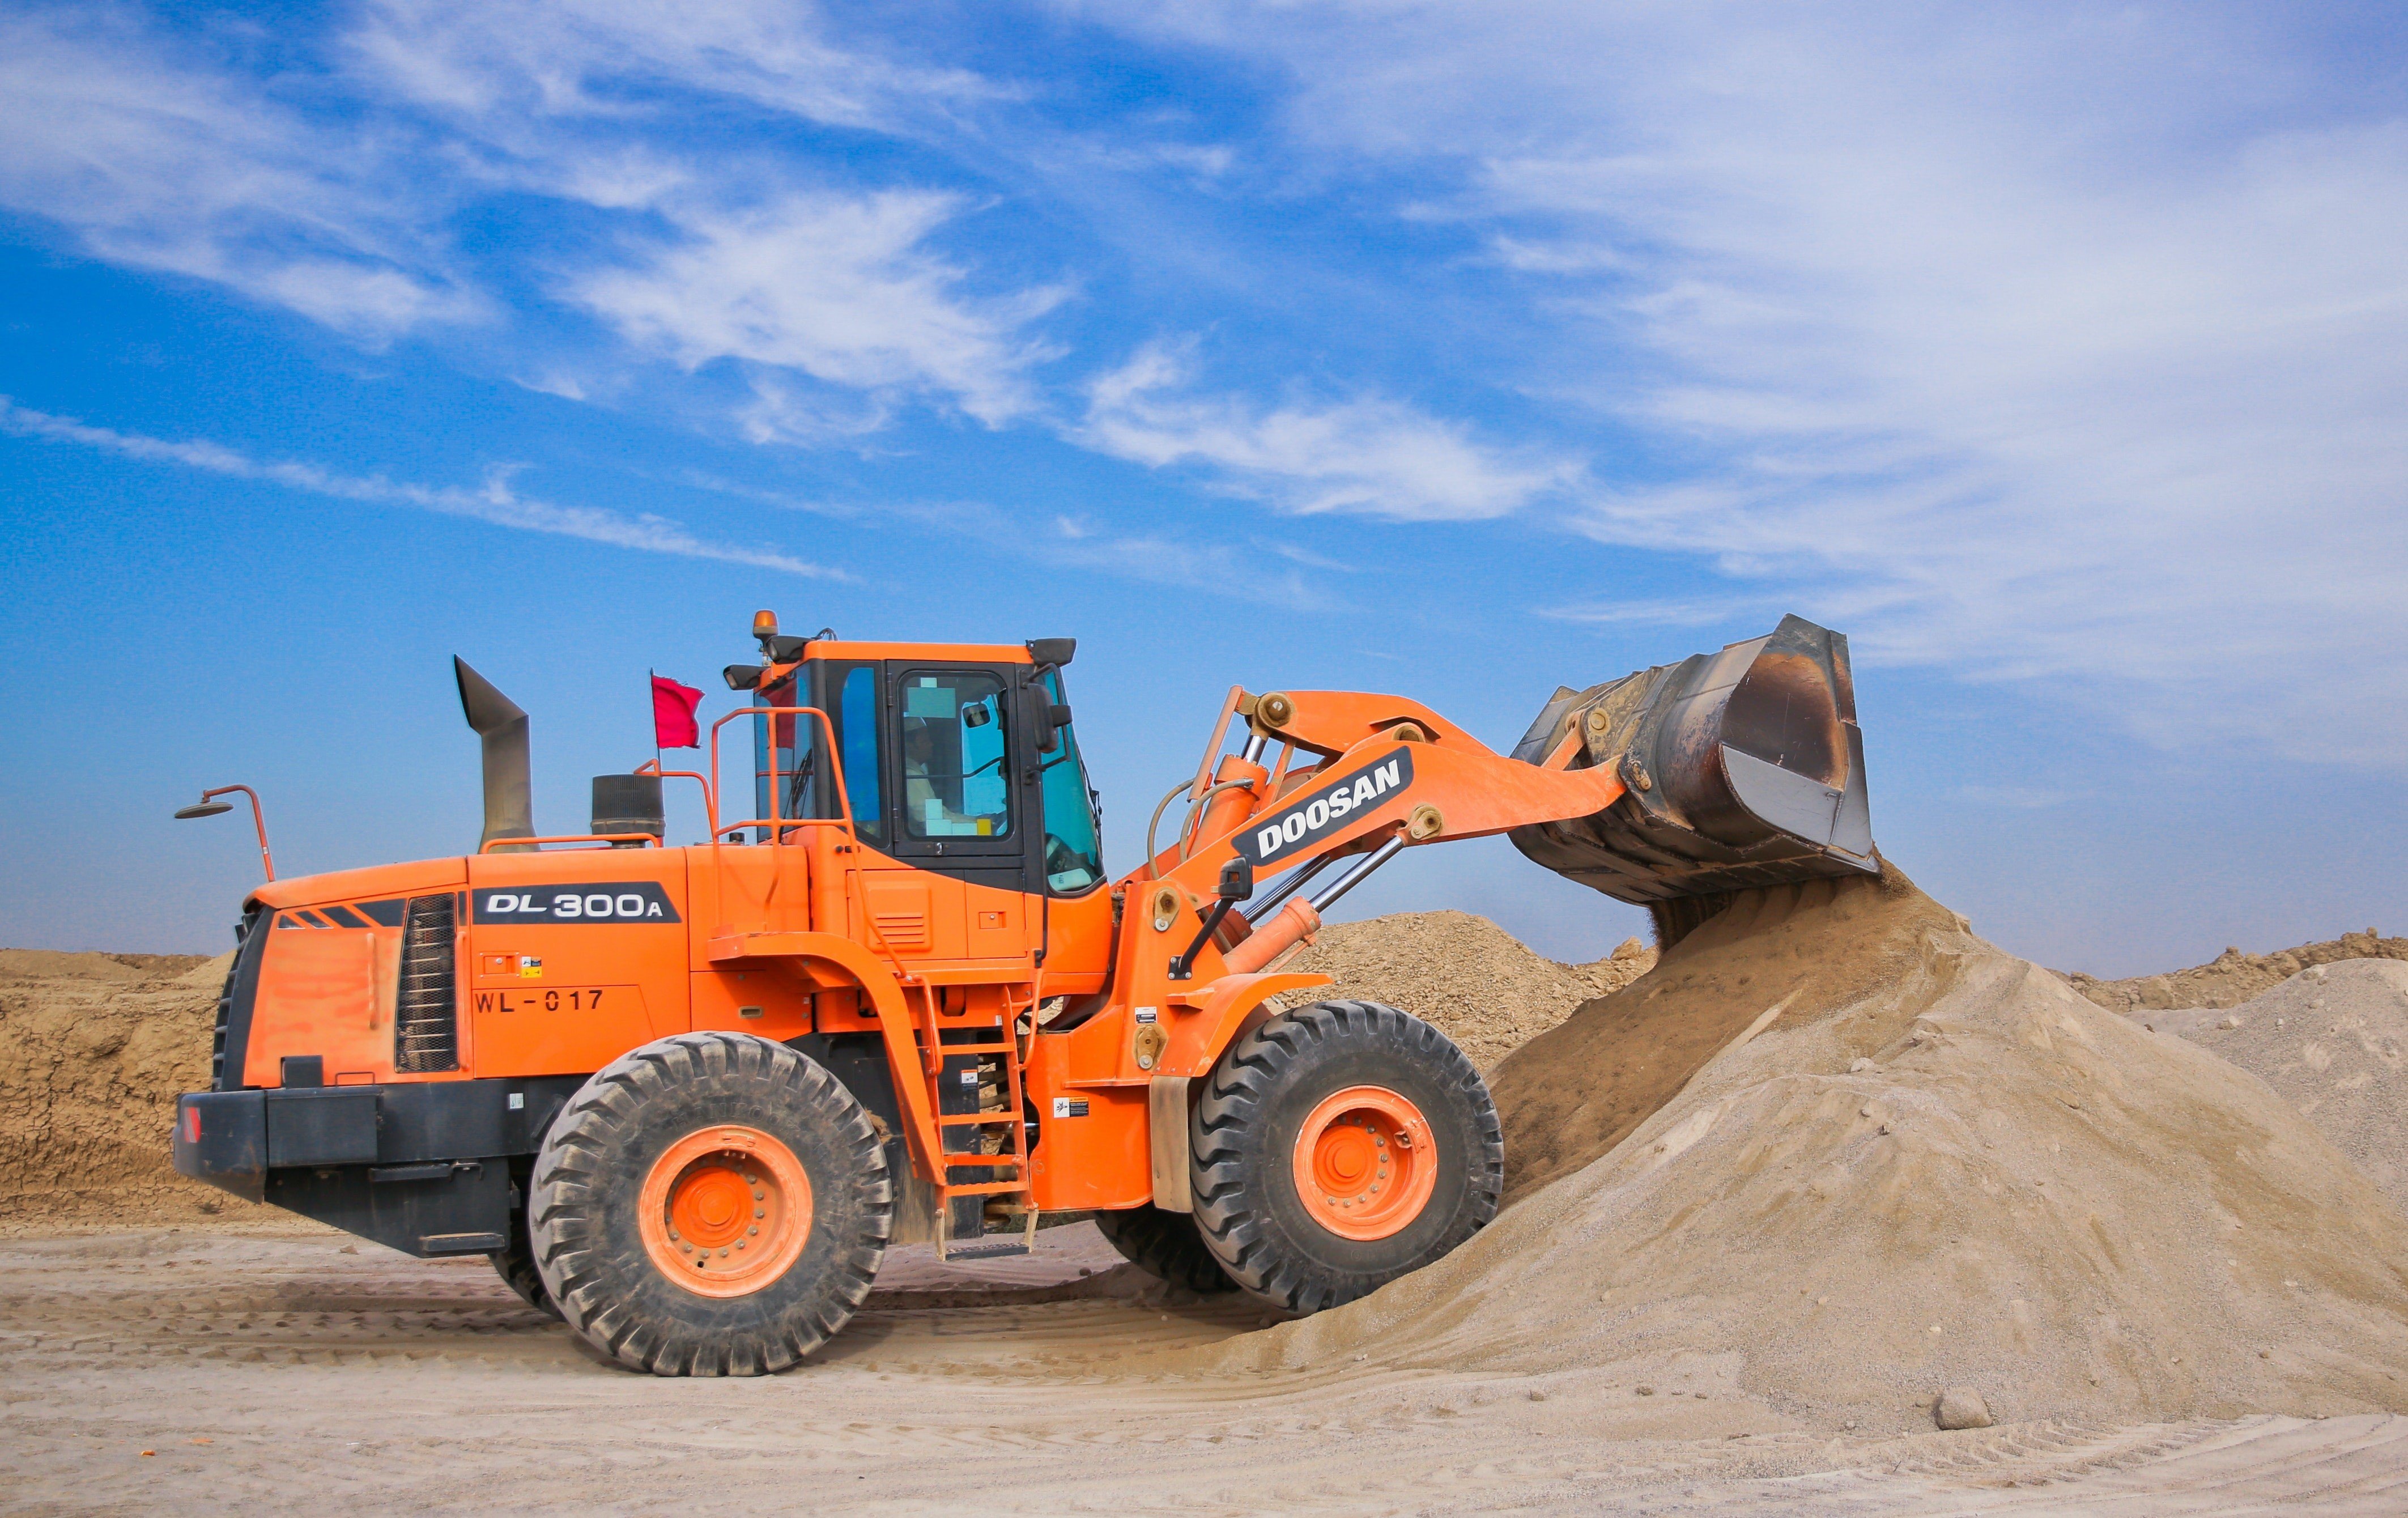 Cost and Savings Opportunities When Leasing Equipment